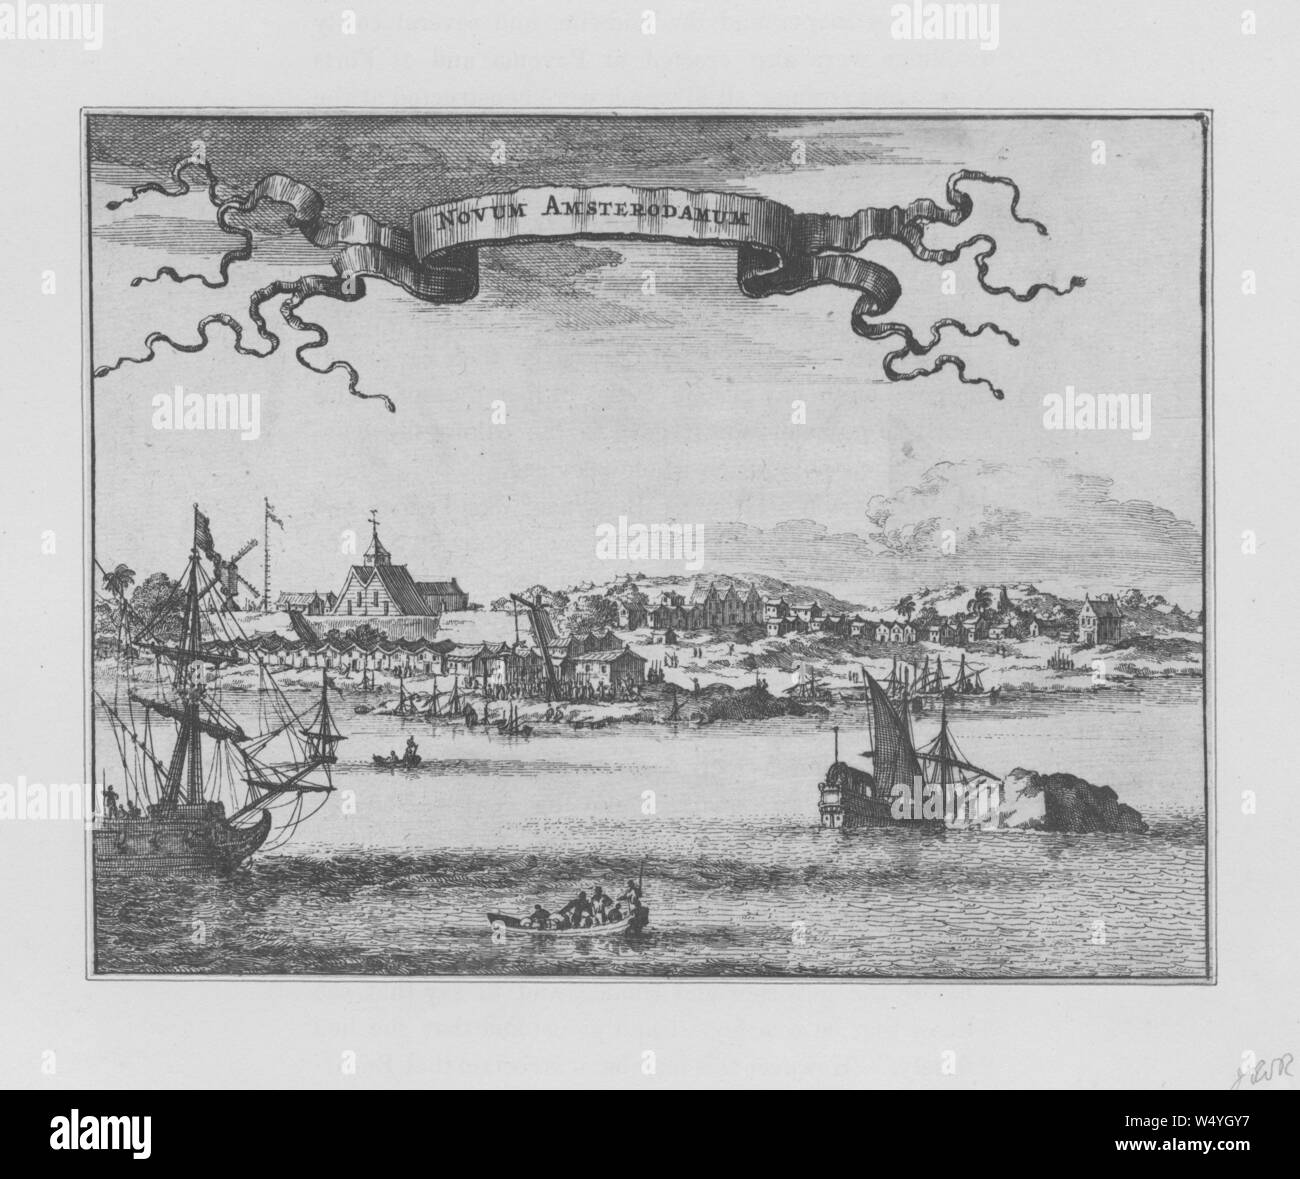 Engraving of the City of Amsterdam, viewed from the harbor, 1700. From the New York Public Library. () Stock Photo